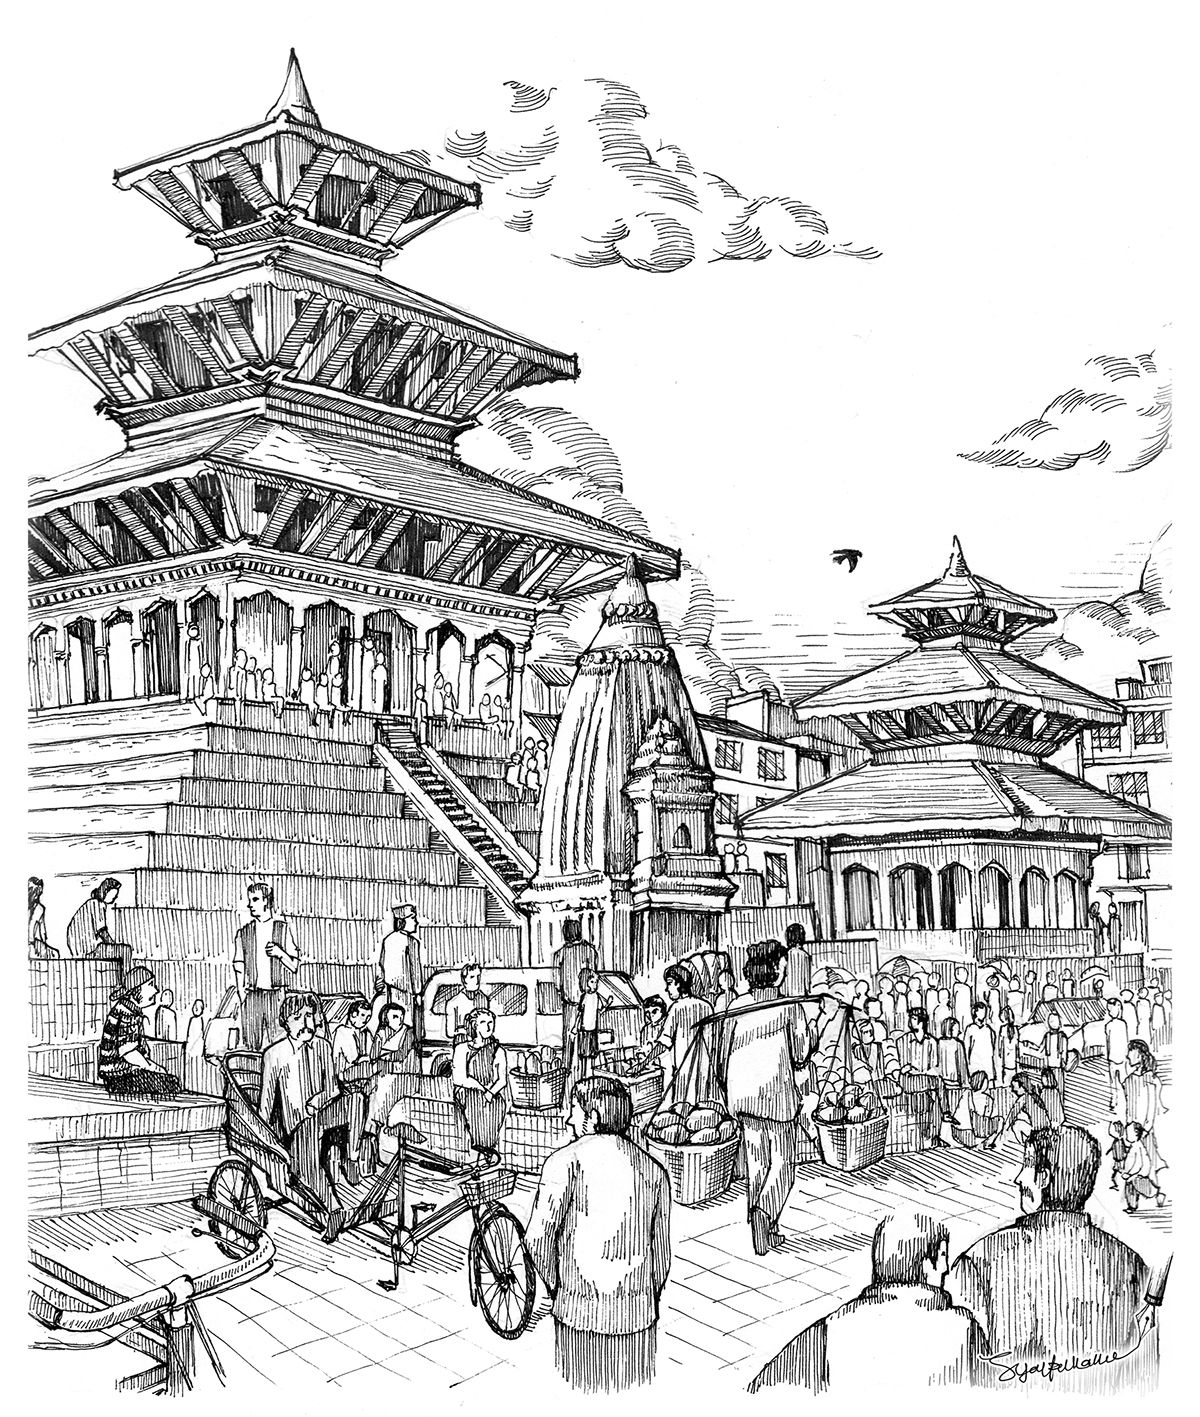 Nepal Sketch at Explore collection of Nepal Sketch